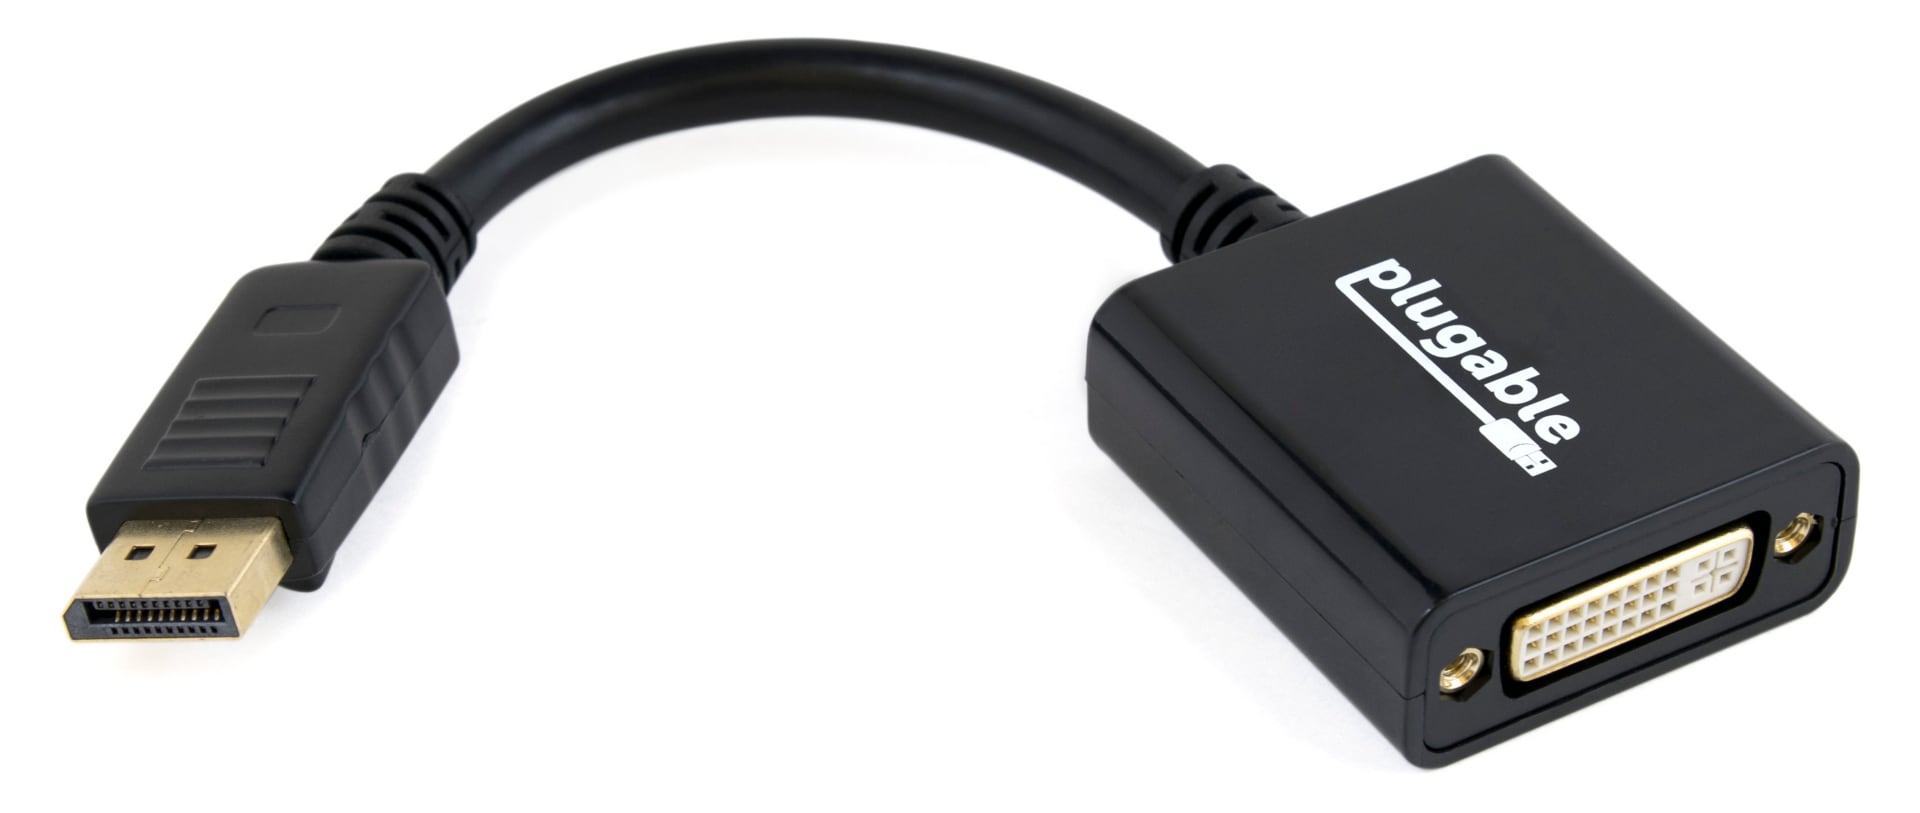 Plugable DisplayPort to DVI Adapter (Windows,Linux Systems and Displays up to 4K UHD 3840x2160@30Hz),Driverless